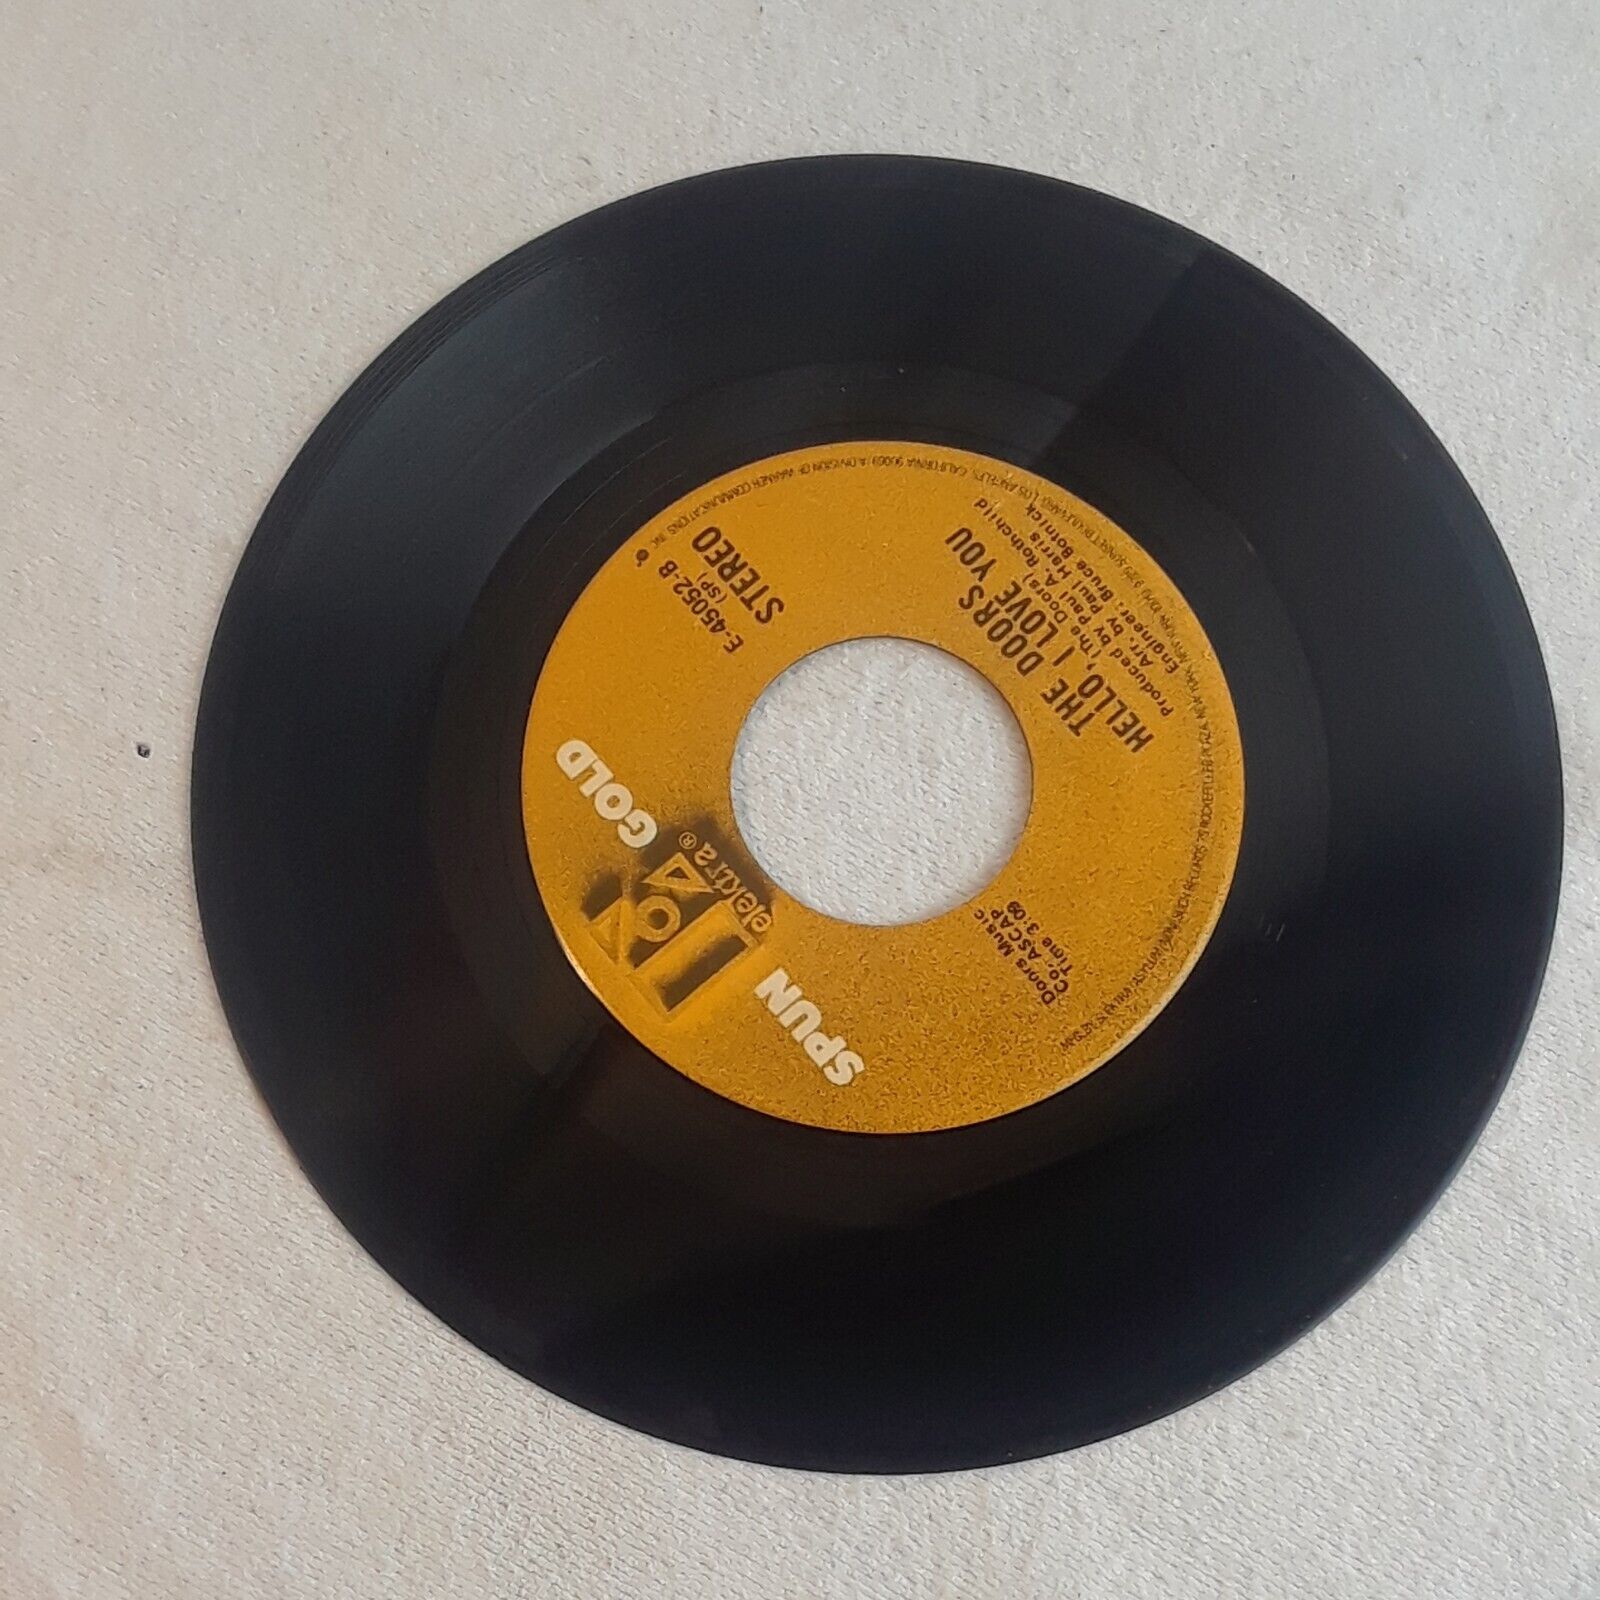 The Doors / Touch Me - Hello I Love You 45 Elektra Gold 45052 tested vinyl